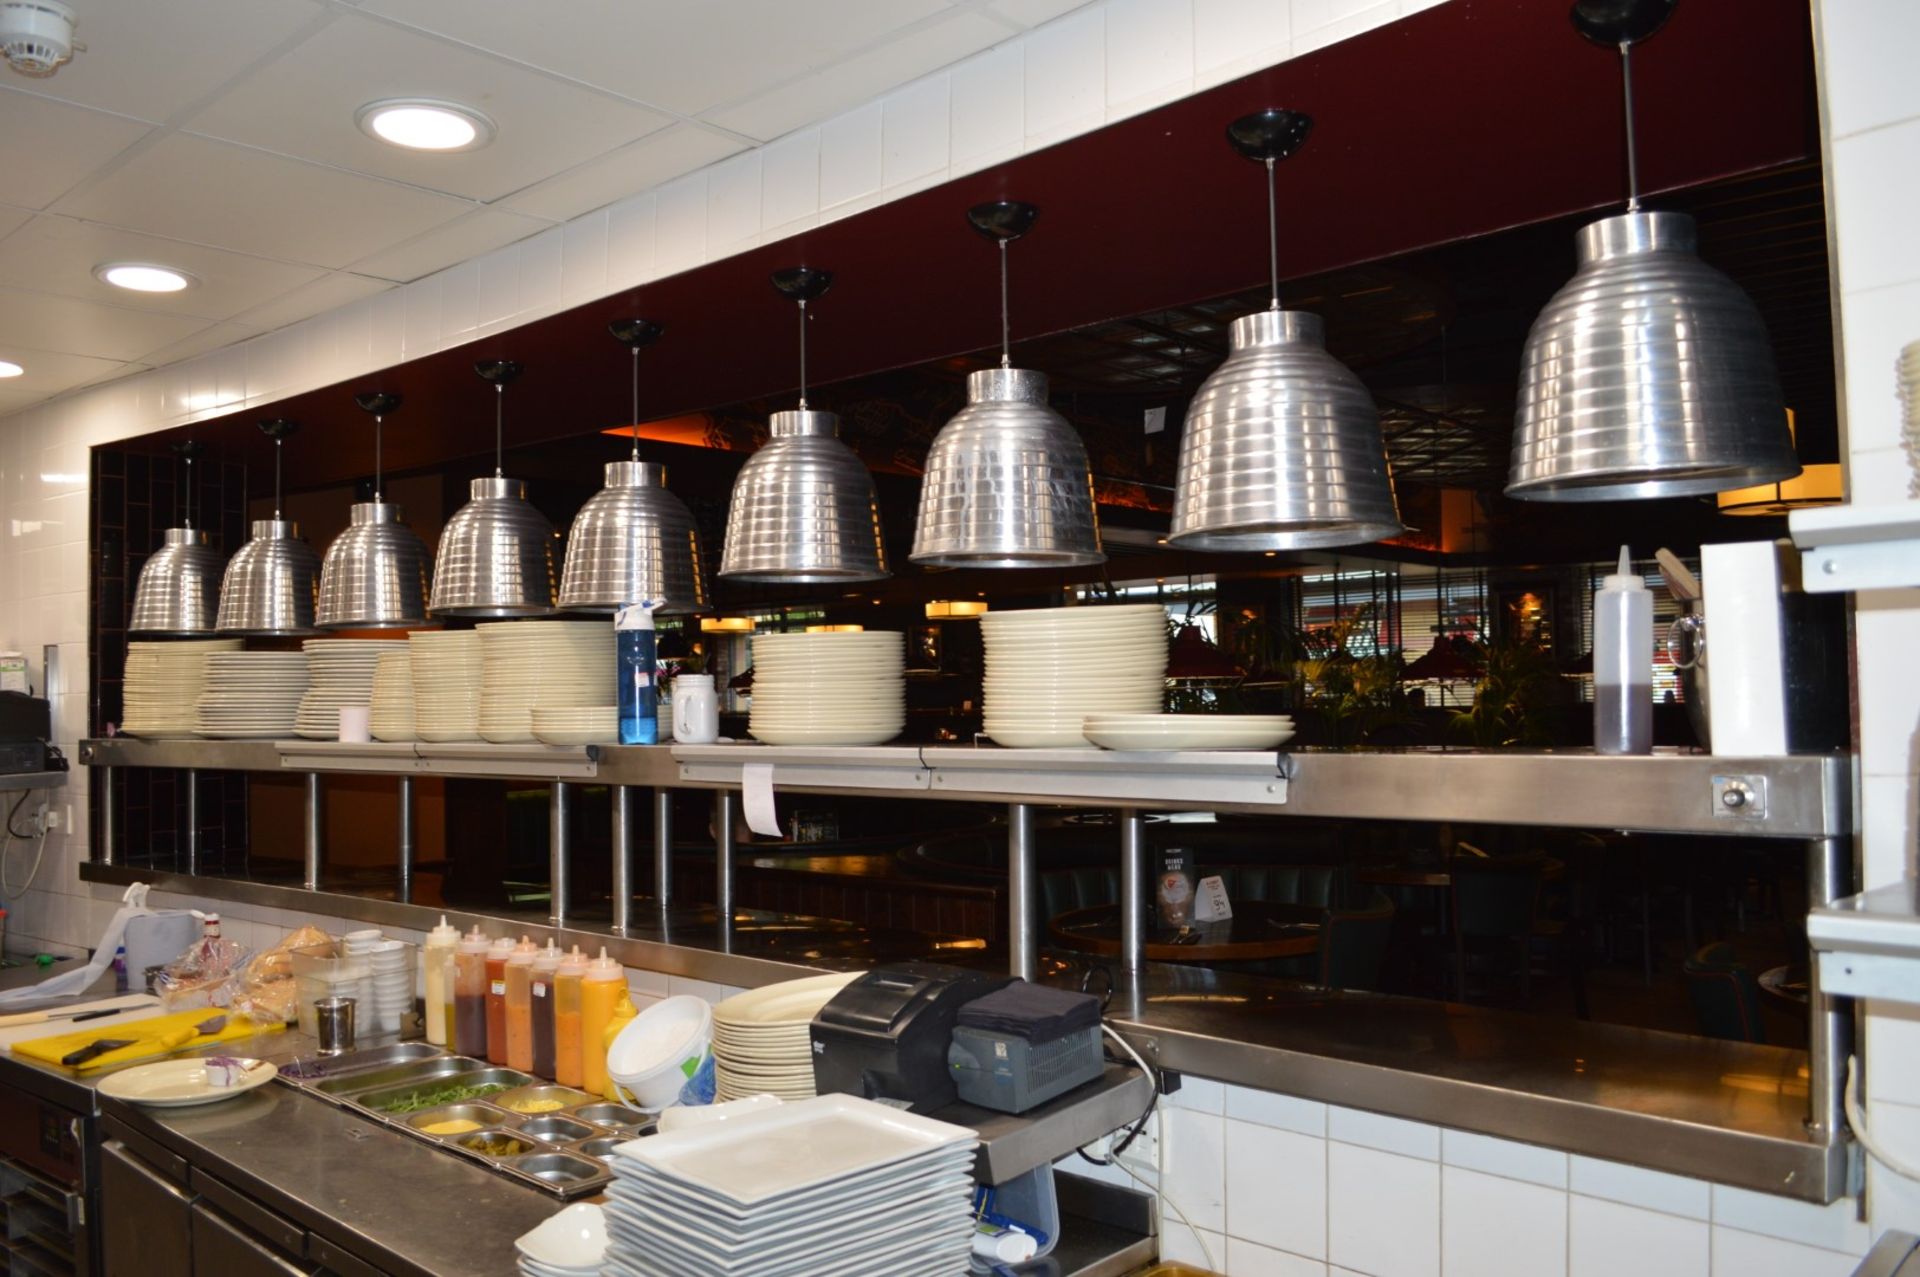 9 x Suspended Food Warming Lamps With Ribbed Chrome Design - CL390 - Location: Sheffield S9 This lot - Image 6 of 6